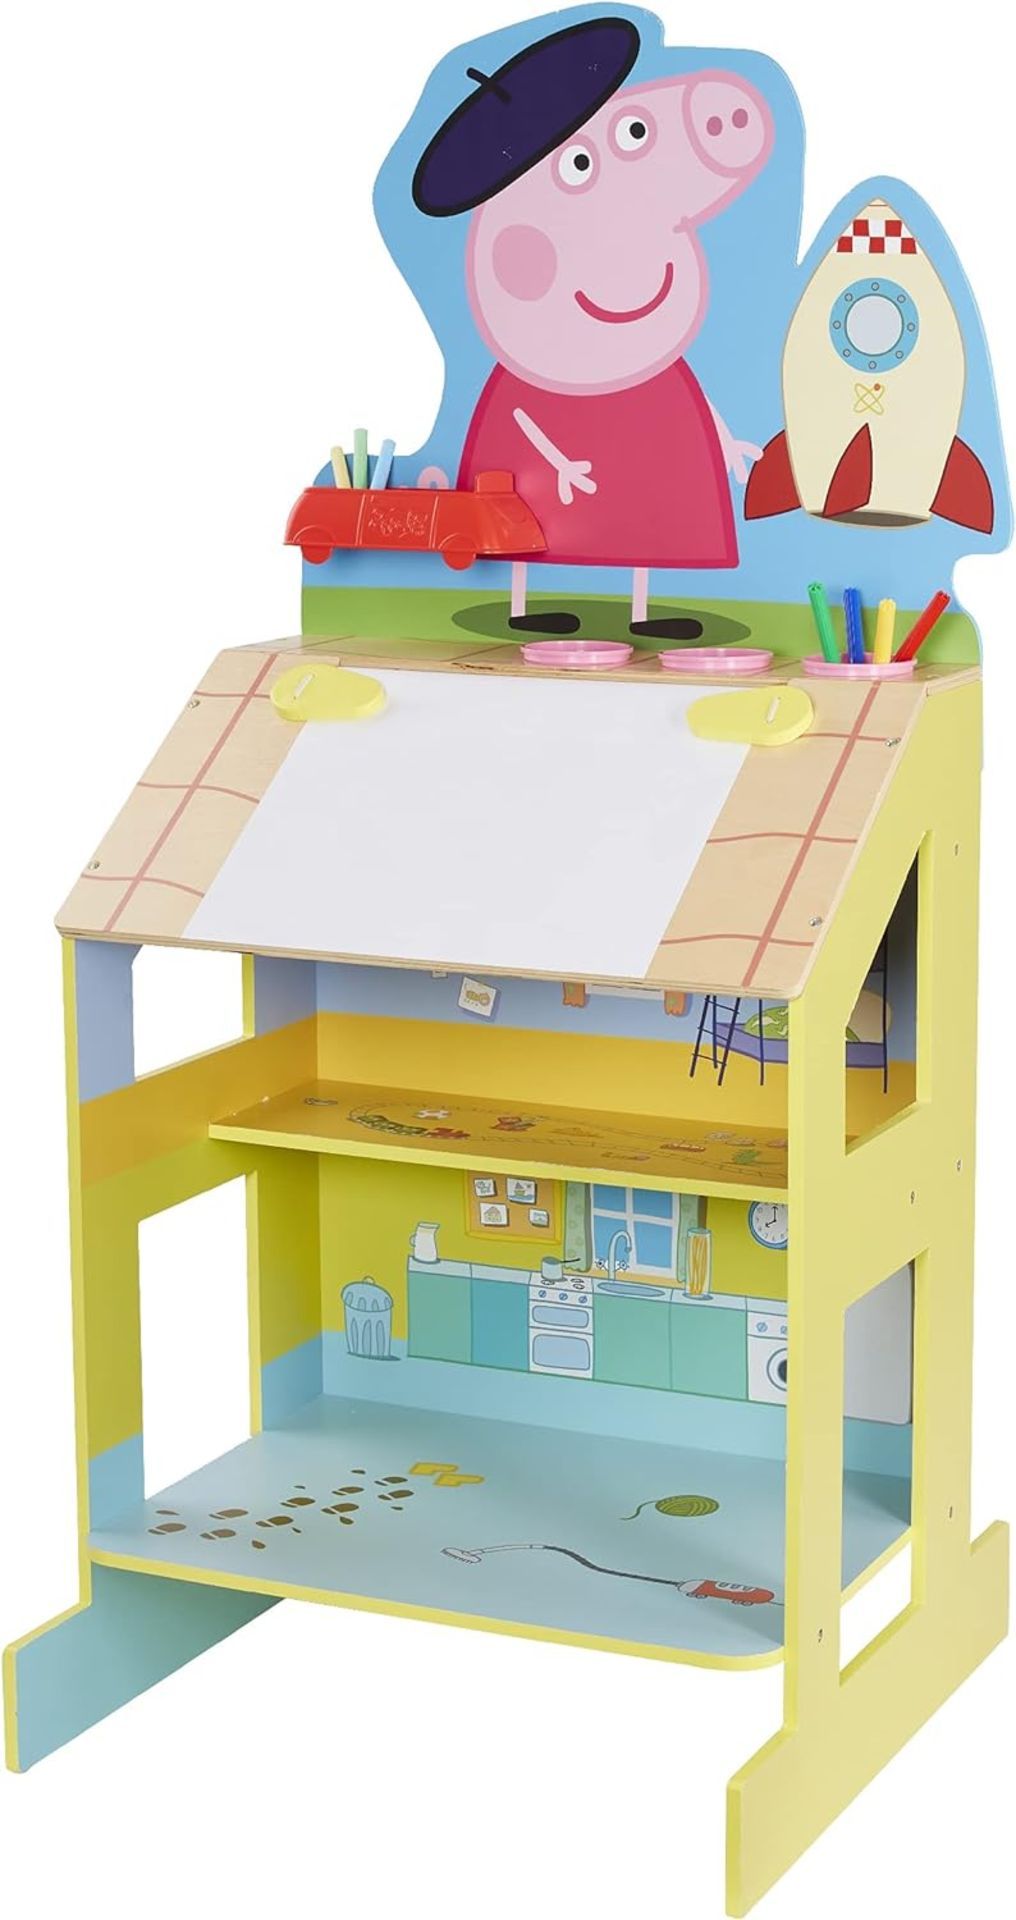 2x NEW & BOXED Peppa Pig Play & Draw Wooden Easel. RRP £69.99 EACH. Peppa's Wooden Play Easel is a